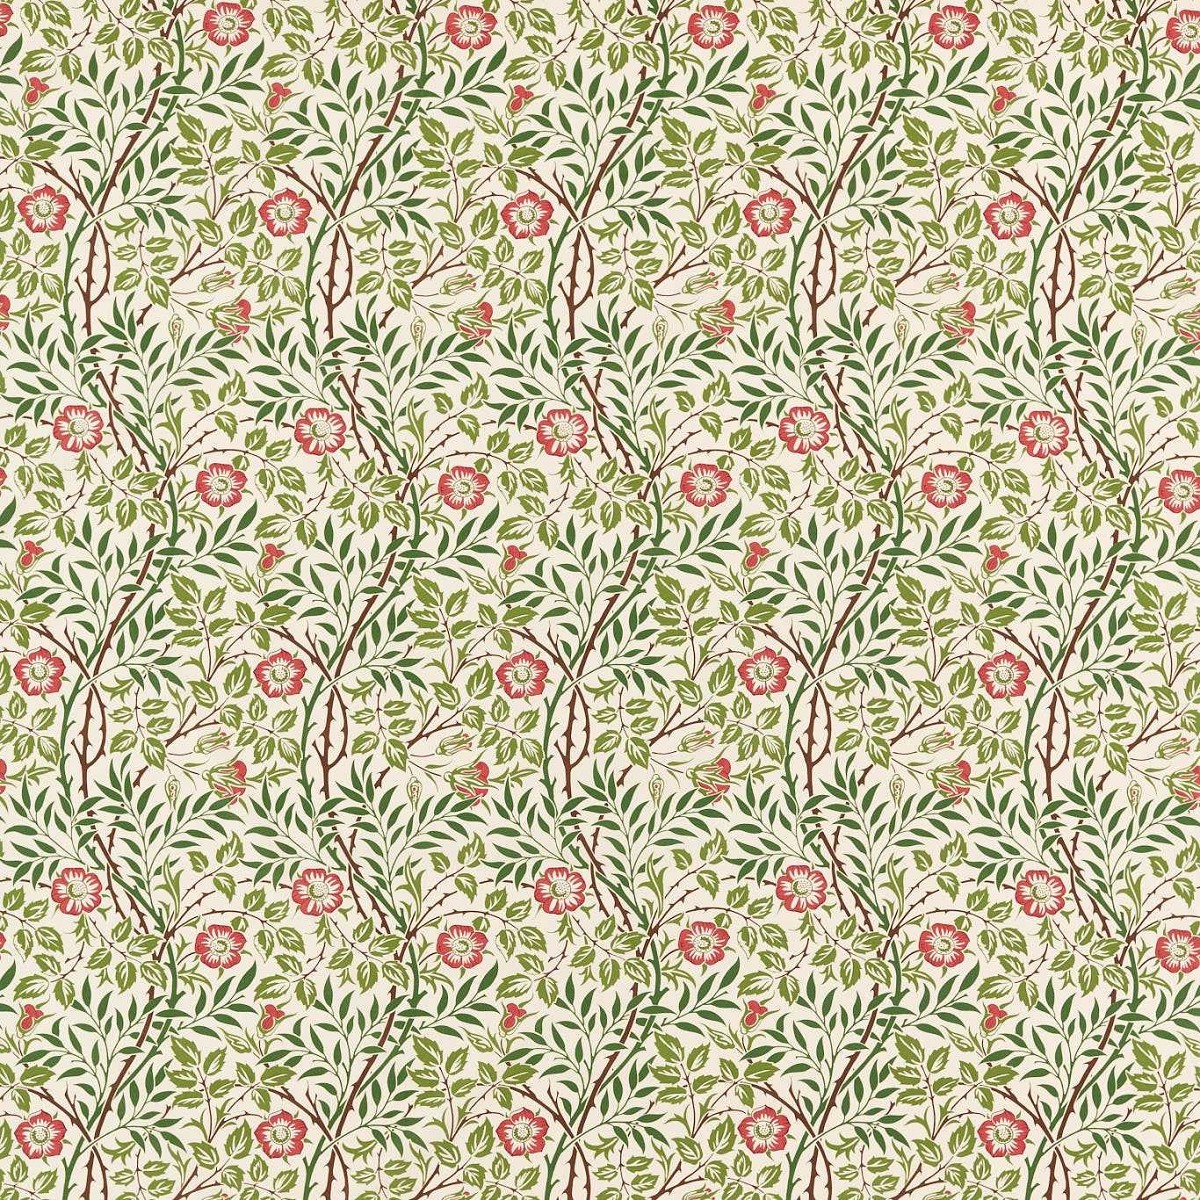 Sweet Briar Boughs/Rose Fabric by William Morris & Co.